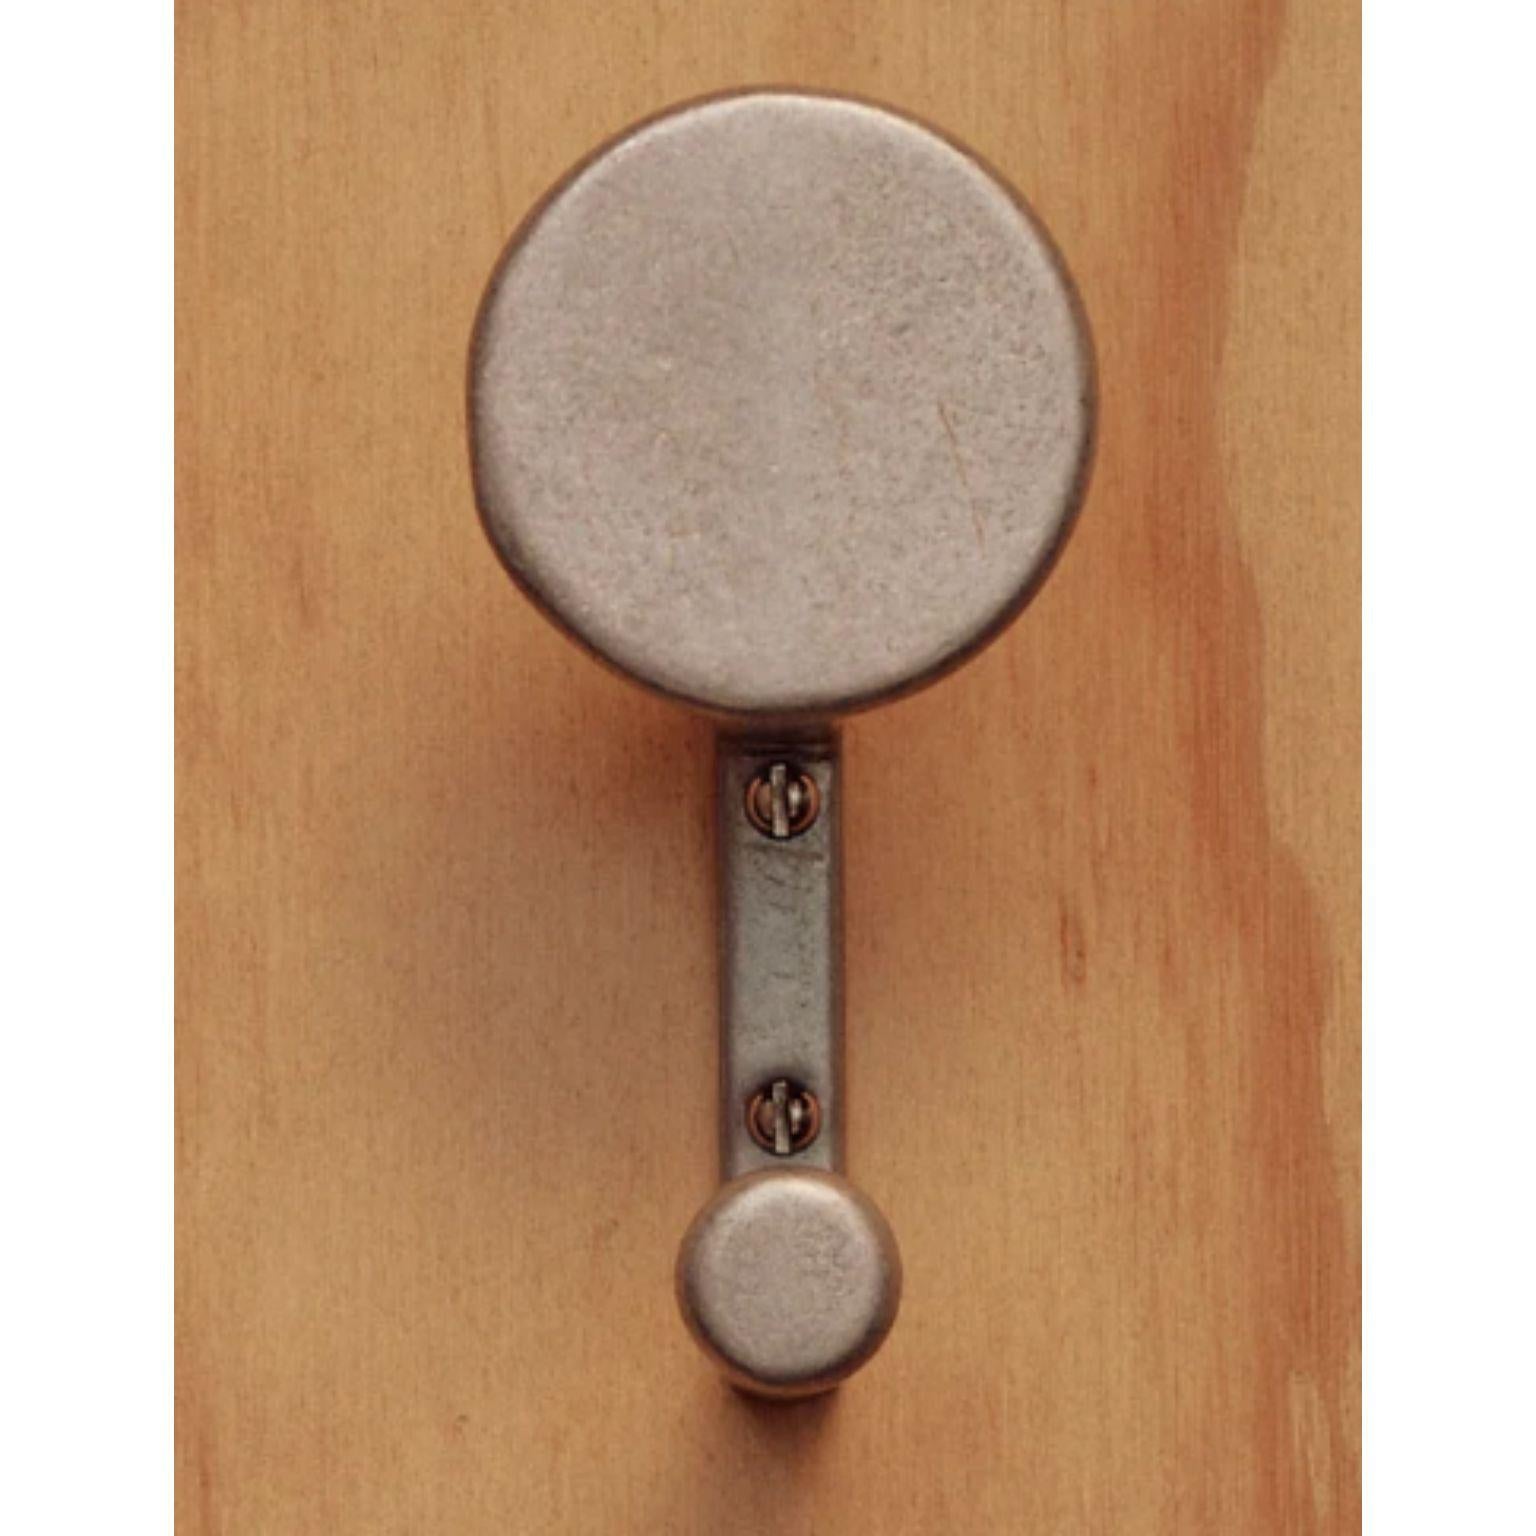 F.ACE WALL HOOK ALUMINIUM by Henry Wilson
Dimensions: D7 x W5.5 x H8.9 cm
Materials: Aluminium 

The F.ACE Hook is a riff on our popular compass Hook. It is sand cast in solid Aluminium and features a full disc for the main hanging point.